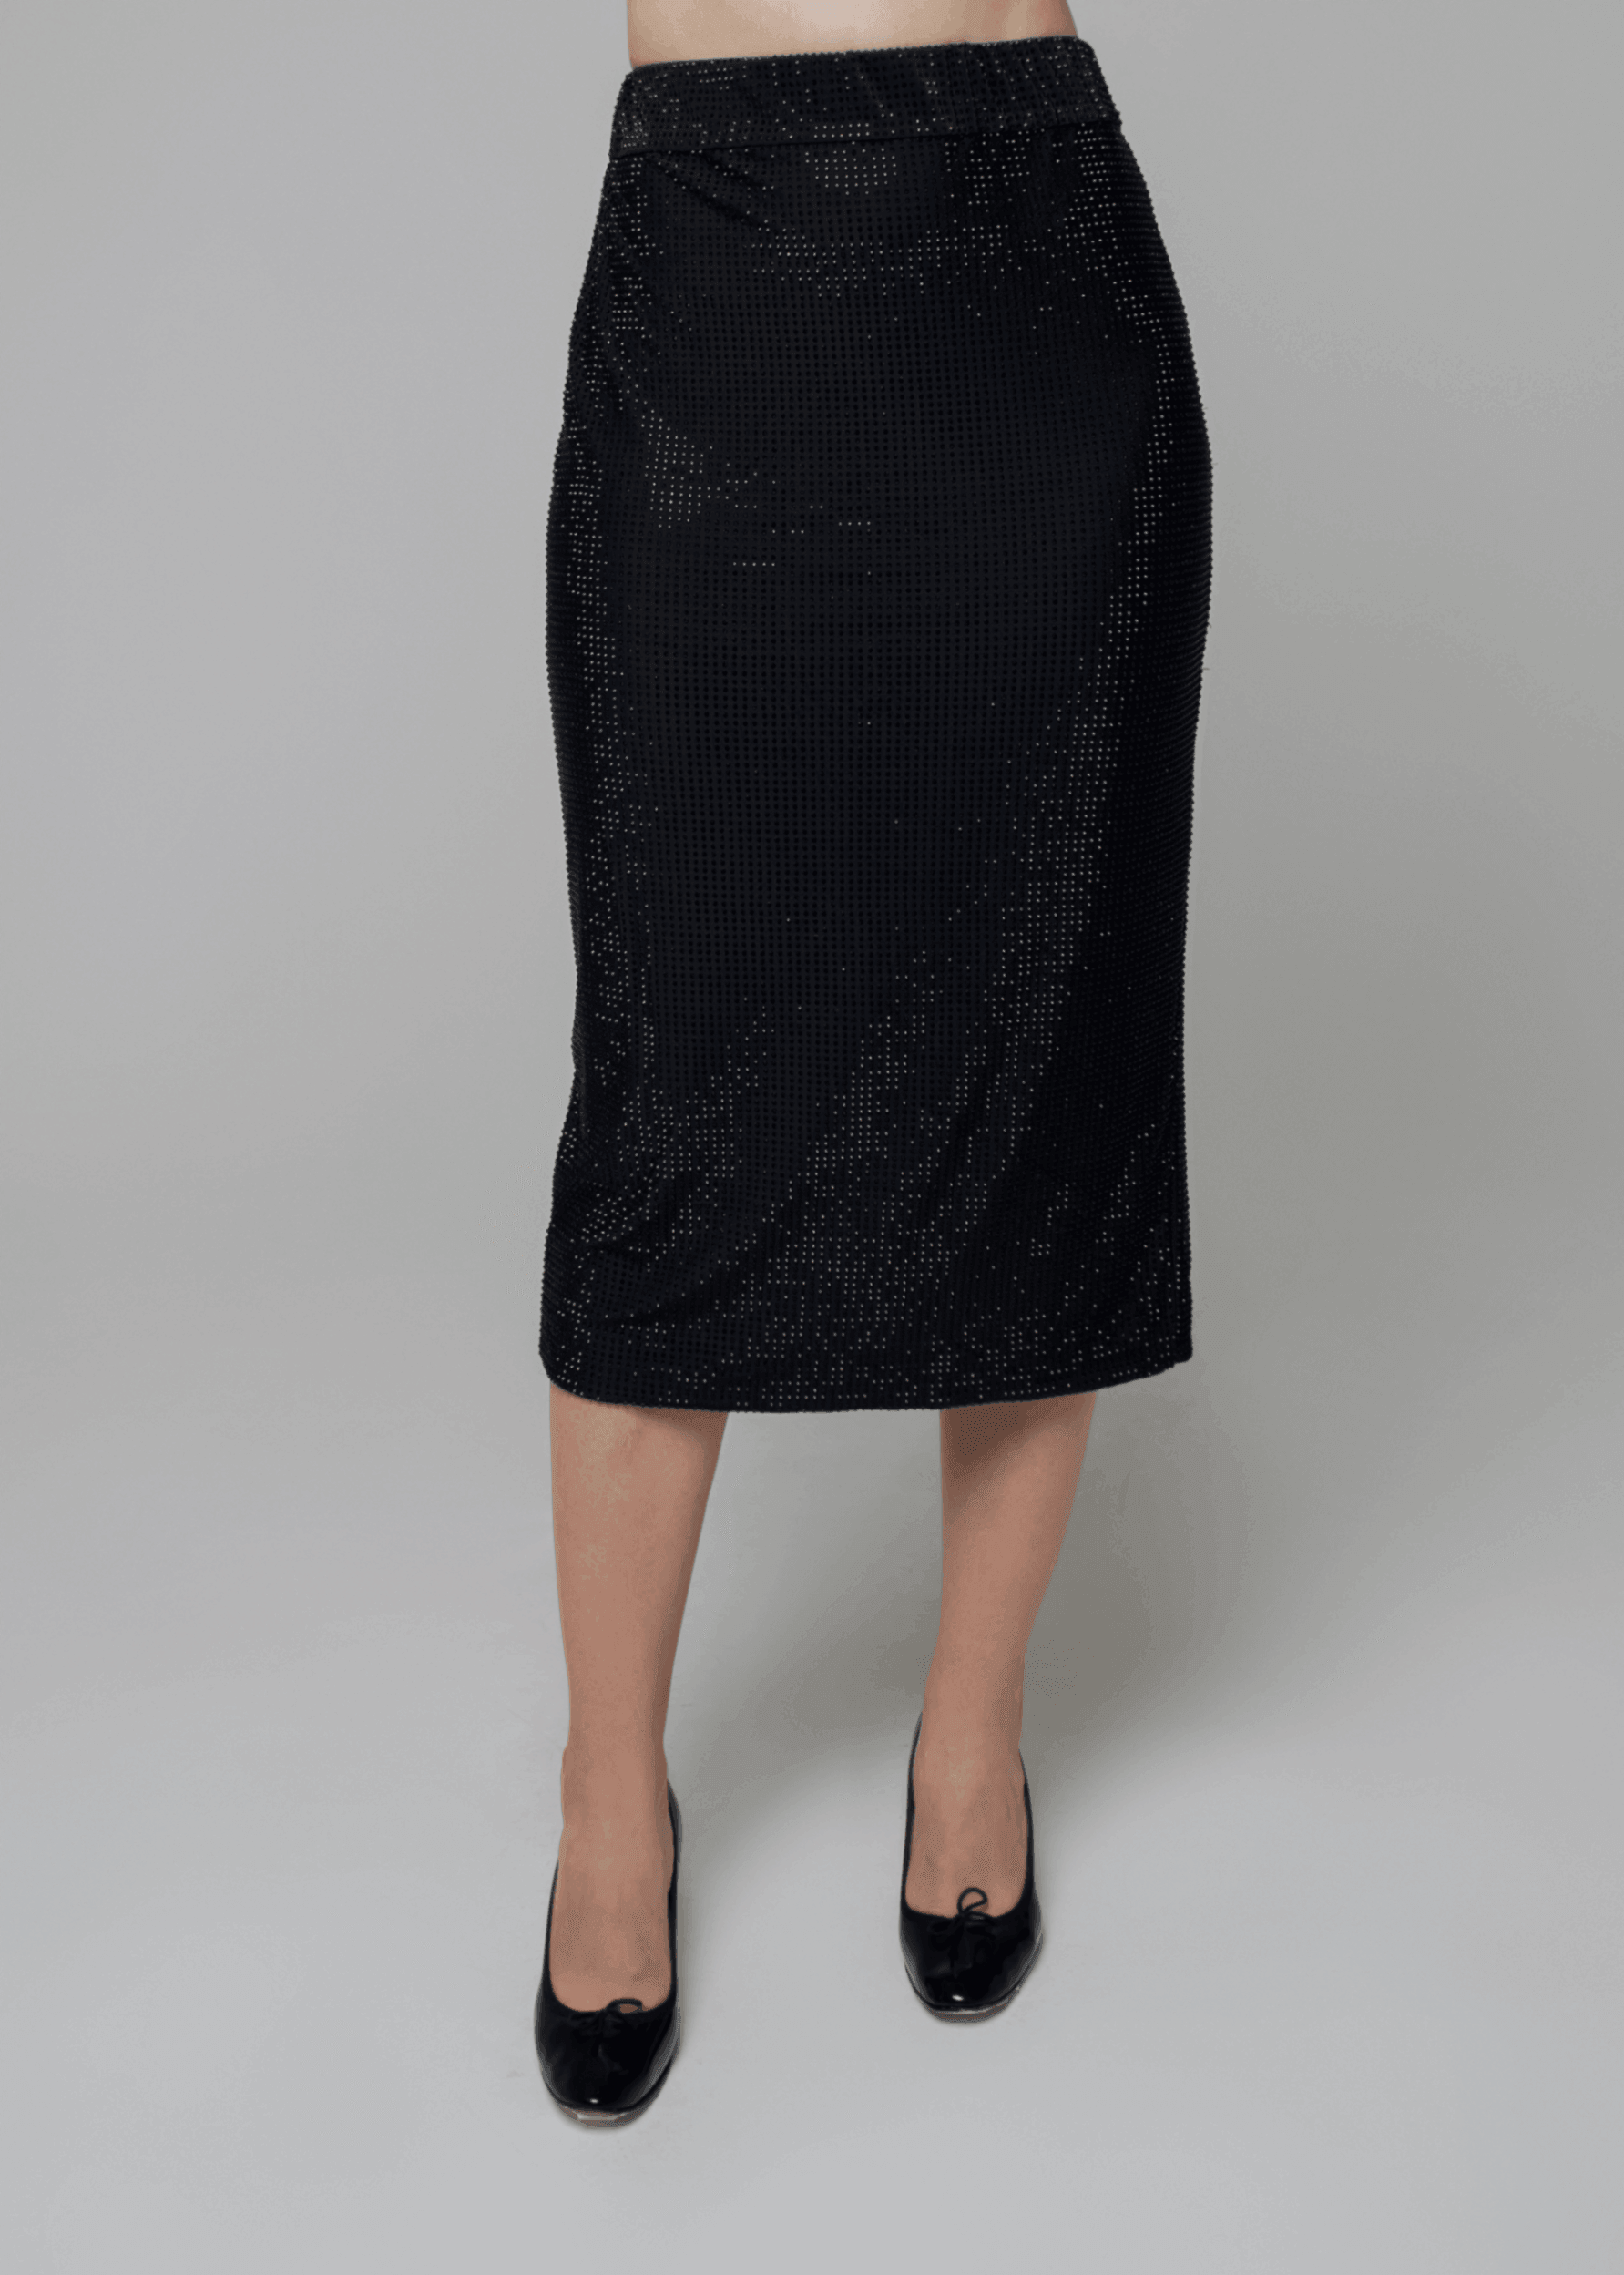 Exquisite detail of Crystal Pencil Skirt showcasing the fine craftsmanship and elegant design characteristic of Axinia Collection 's luxury collection.